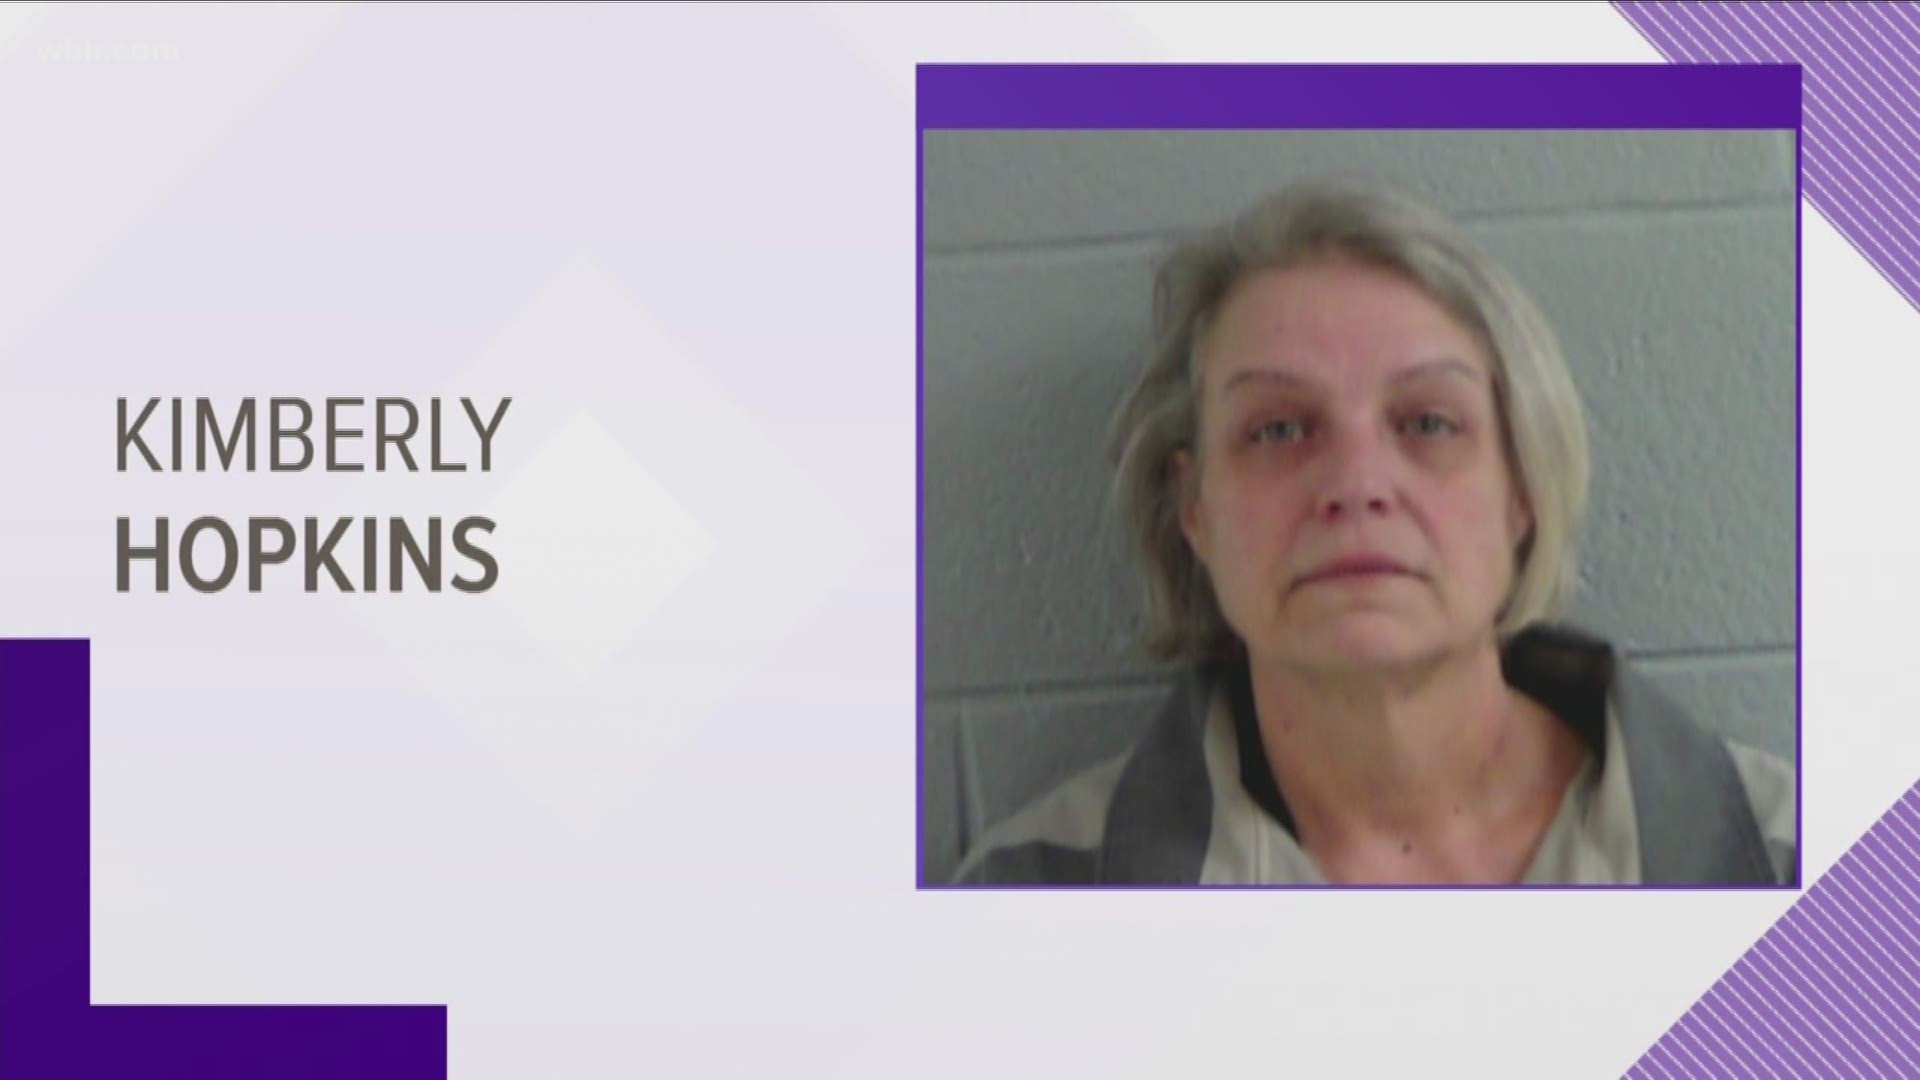 The attempted murder came after 56-year-old Kimberly Hopkins drove from Oregon to Tellico Village in 2018 to visit her estranged, adoptive parents.